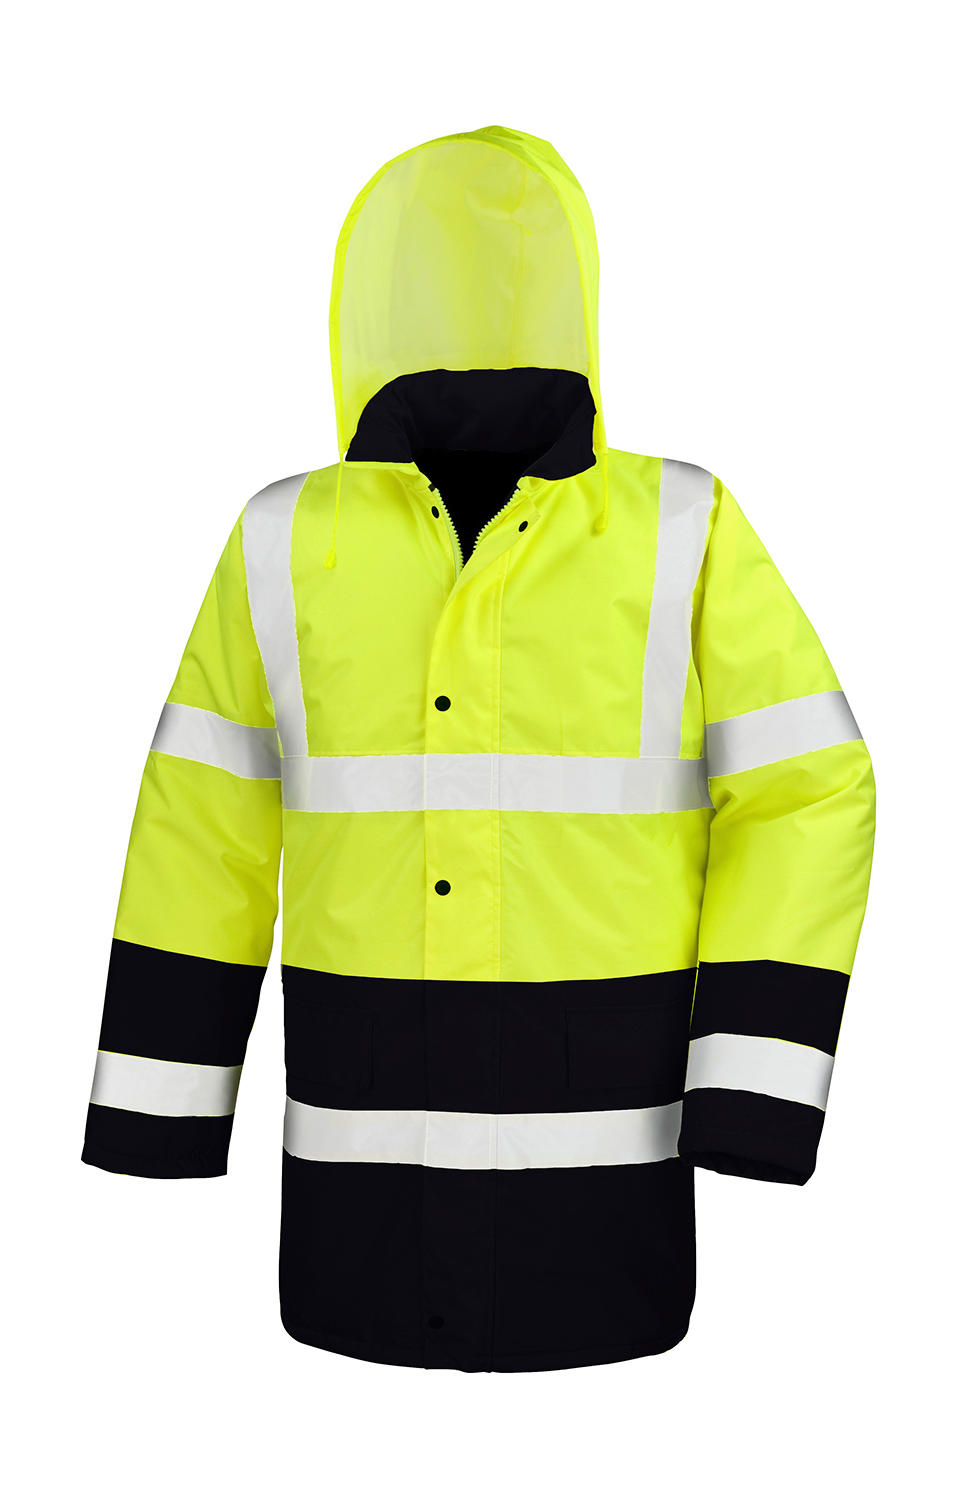  Core Motorway 2-Tone Safety Coat in Farbe Fluorescent Yellow/Black